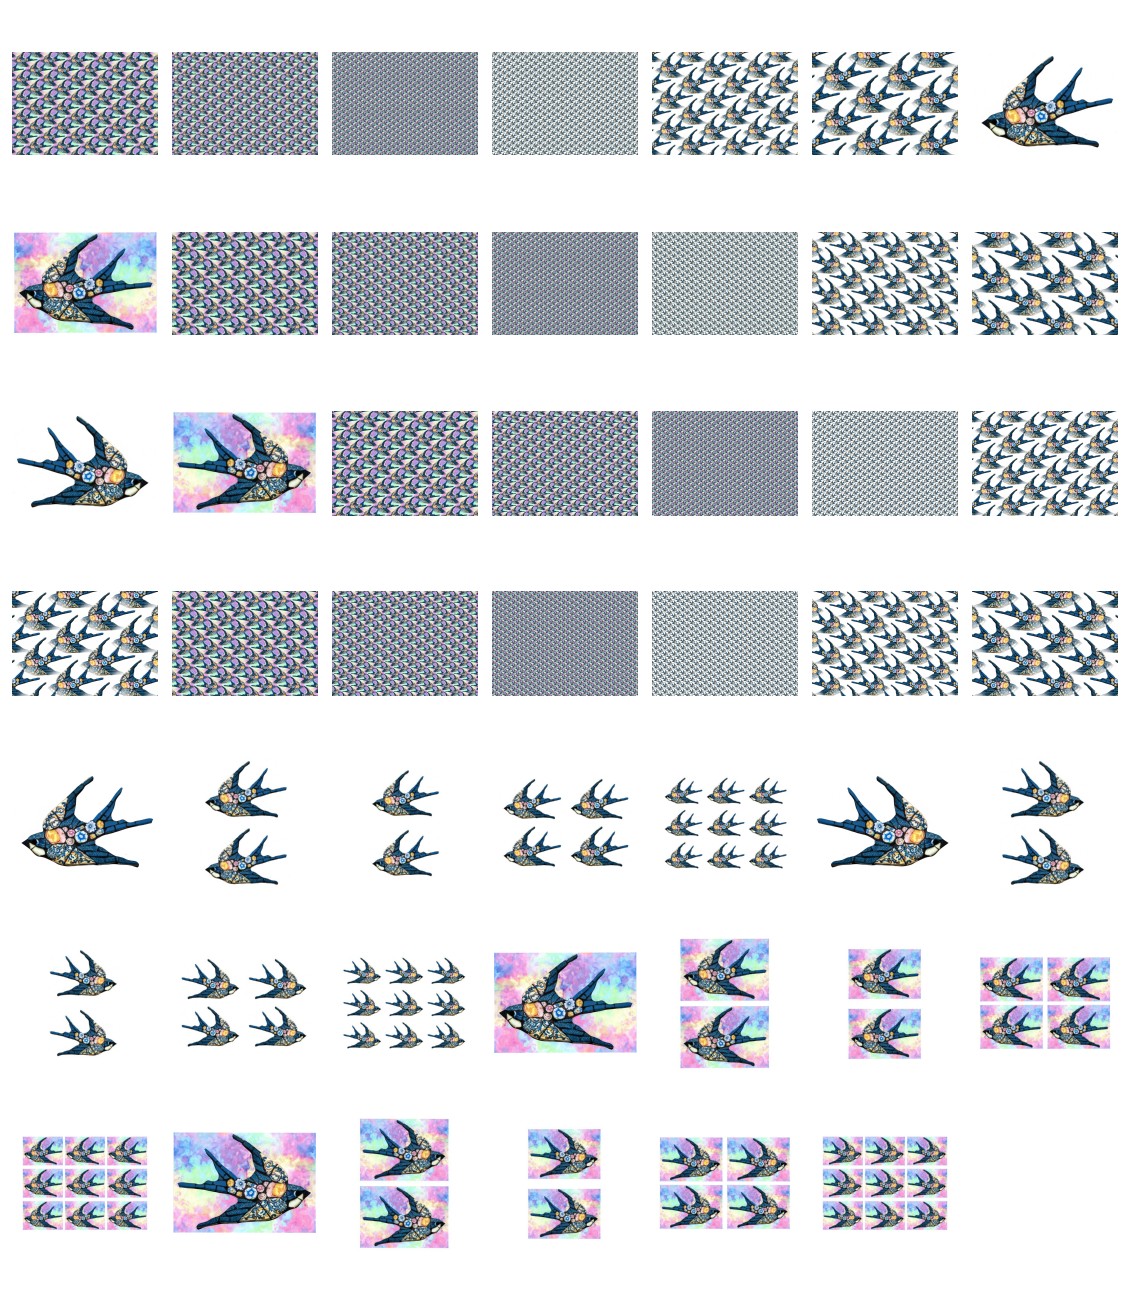 Tiled Effect Birds - Set 05 - 48 Pages to Download